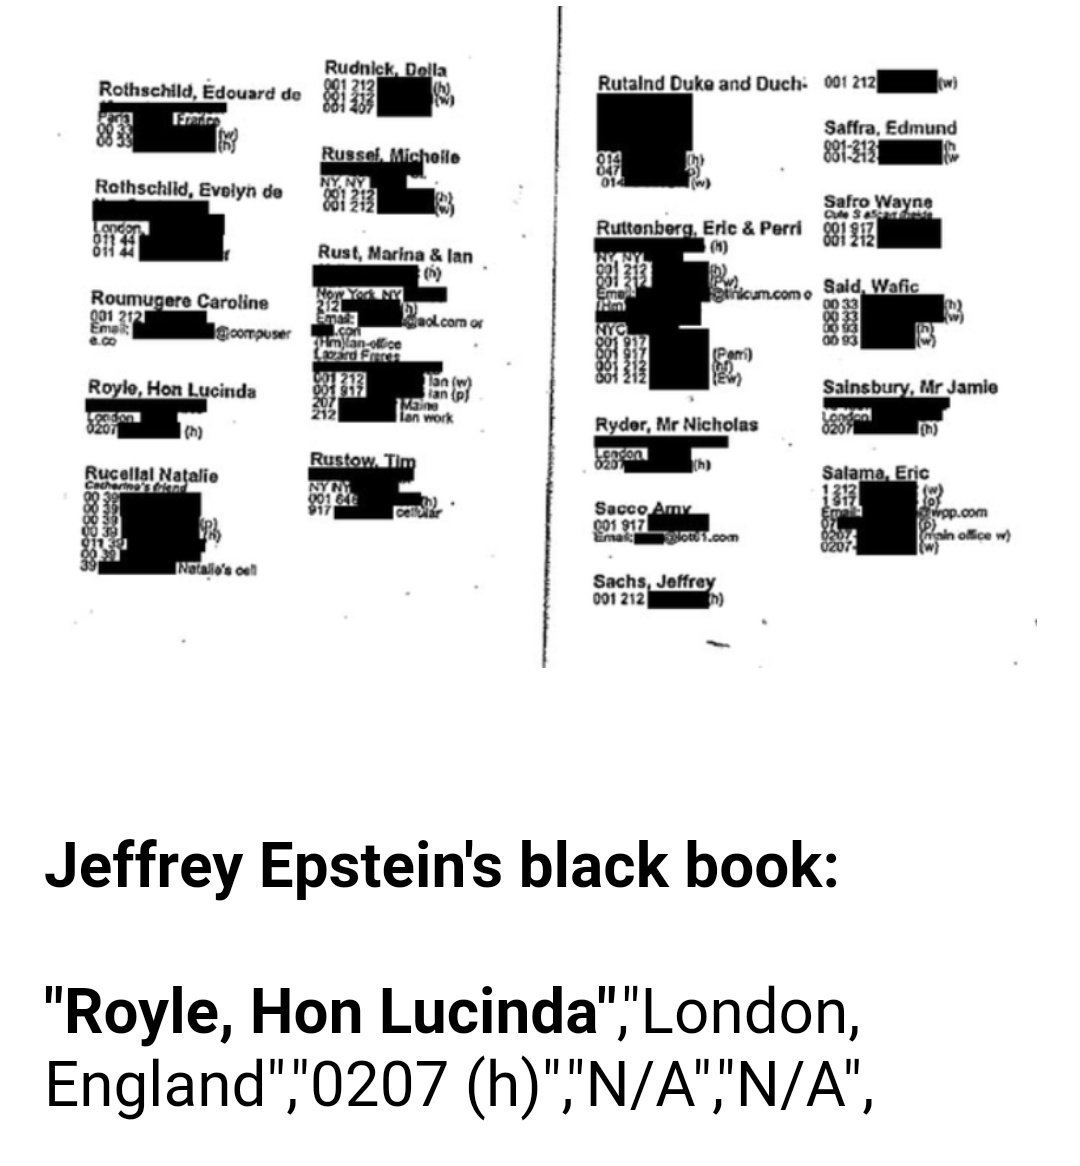 Anthony Royle was MP for Richmond in Surrey, the home of Britain's infamous Elm Guest House child brothel until the year after it was raised by Met police. His daughter Lucinda features in Epstein's telephone book ... https://twitter.com/ciabaudo/status/1132604291854798848?s=19